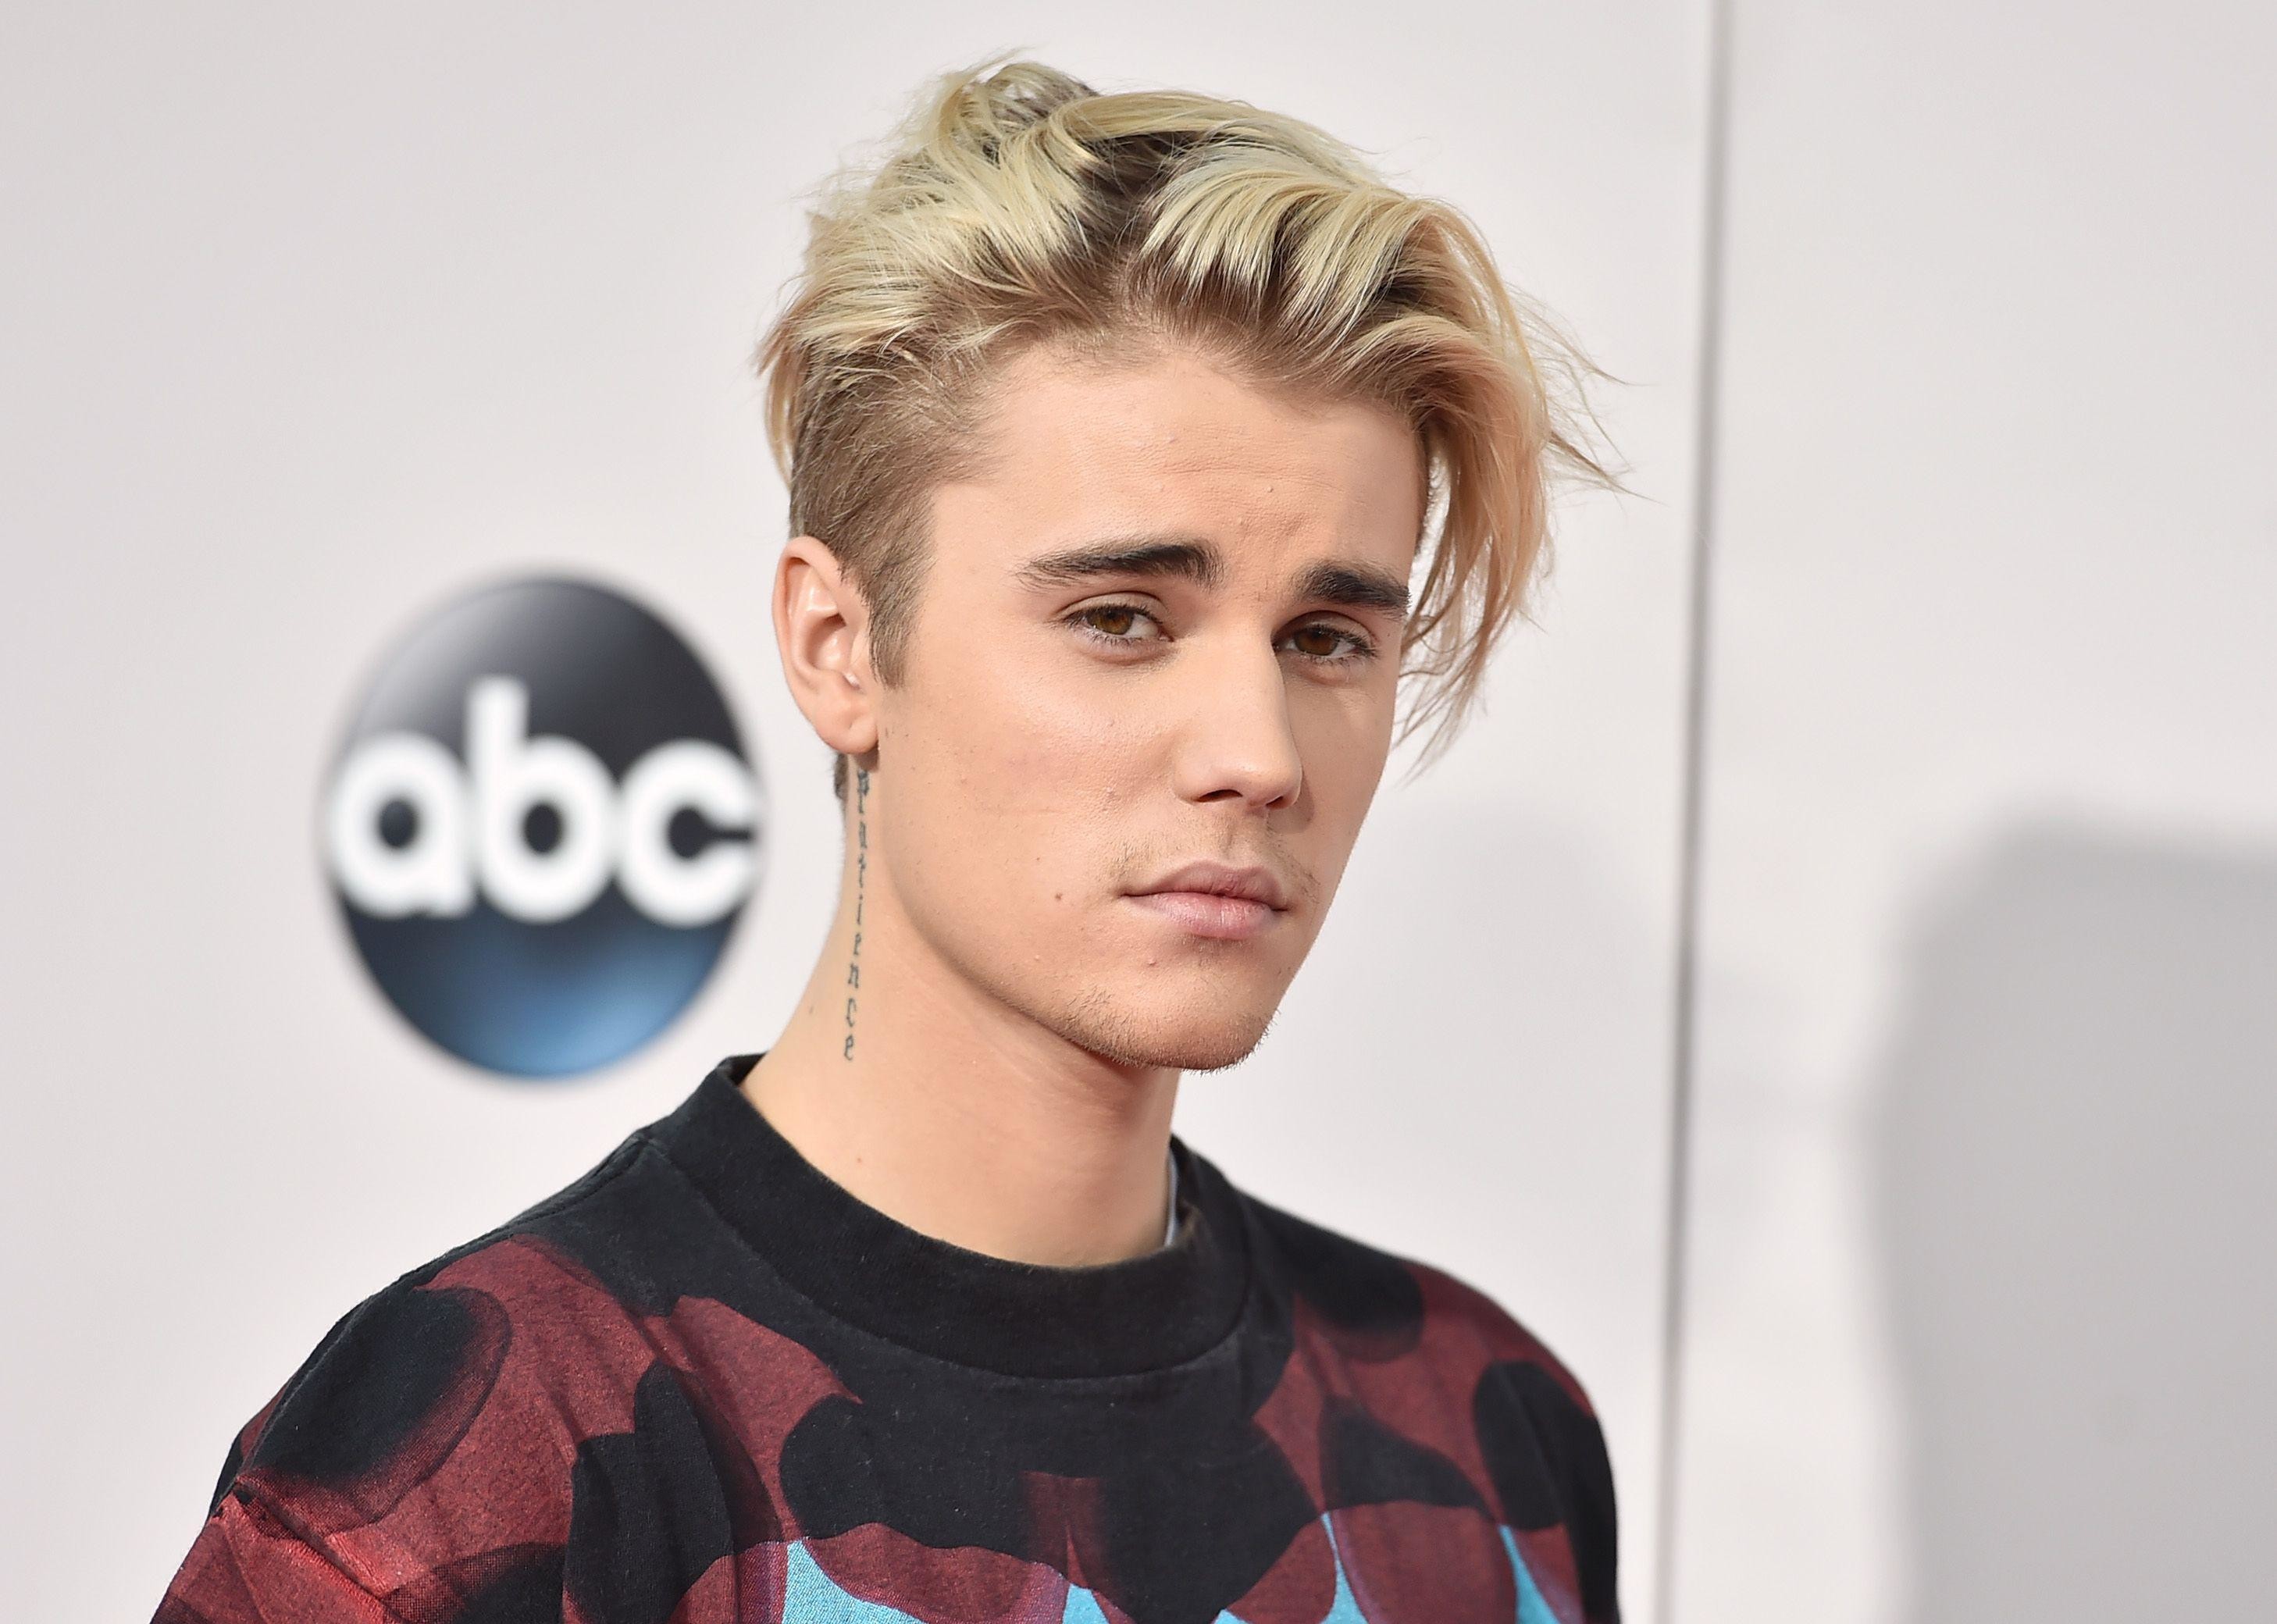 2916x2080 49+ HD Justin Bieber Wallpapers and Photos | View HQFX Wallpapers